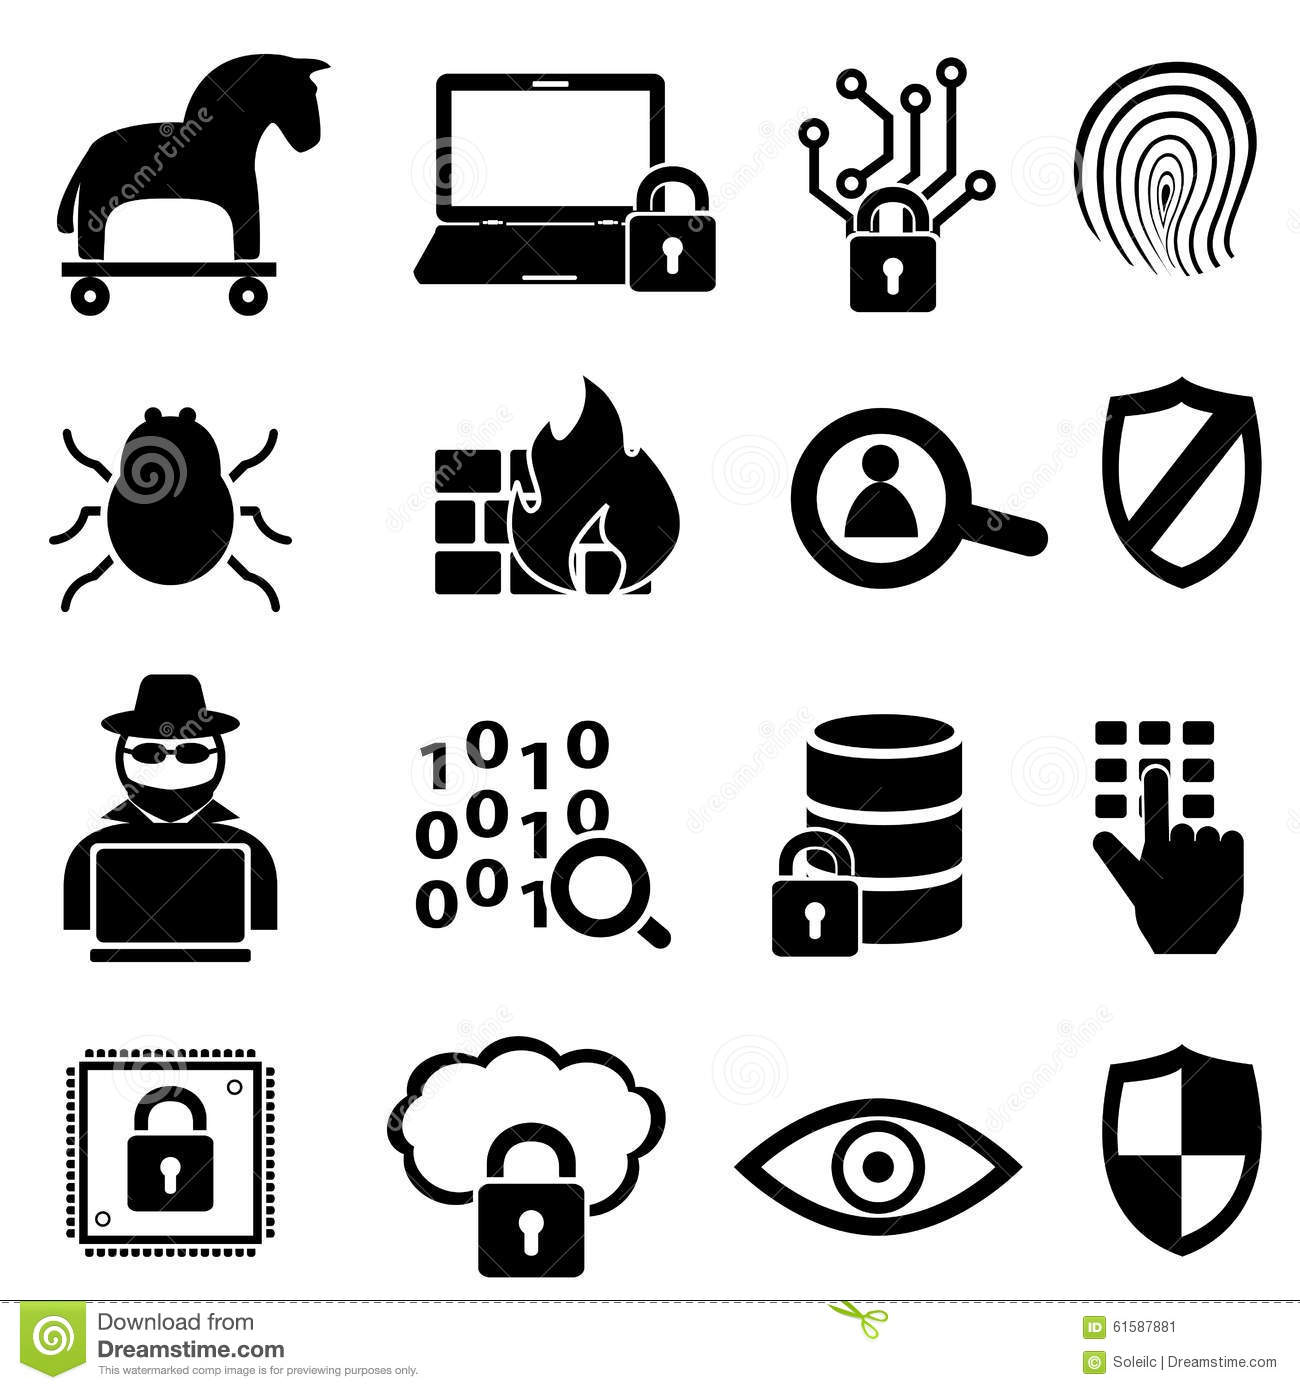 Computer Security Icon